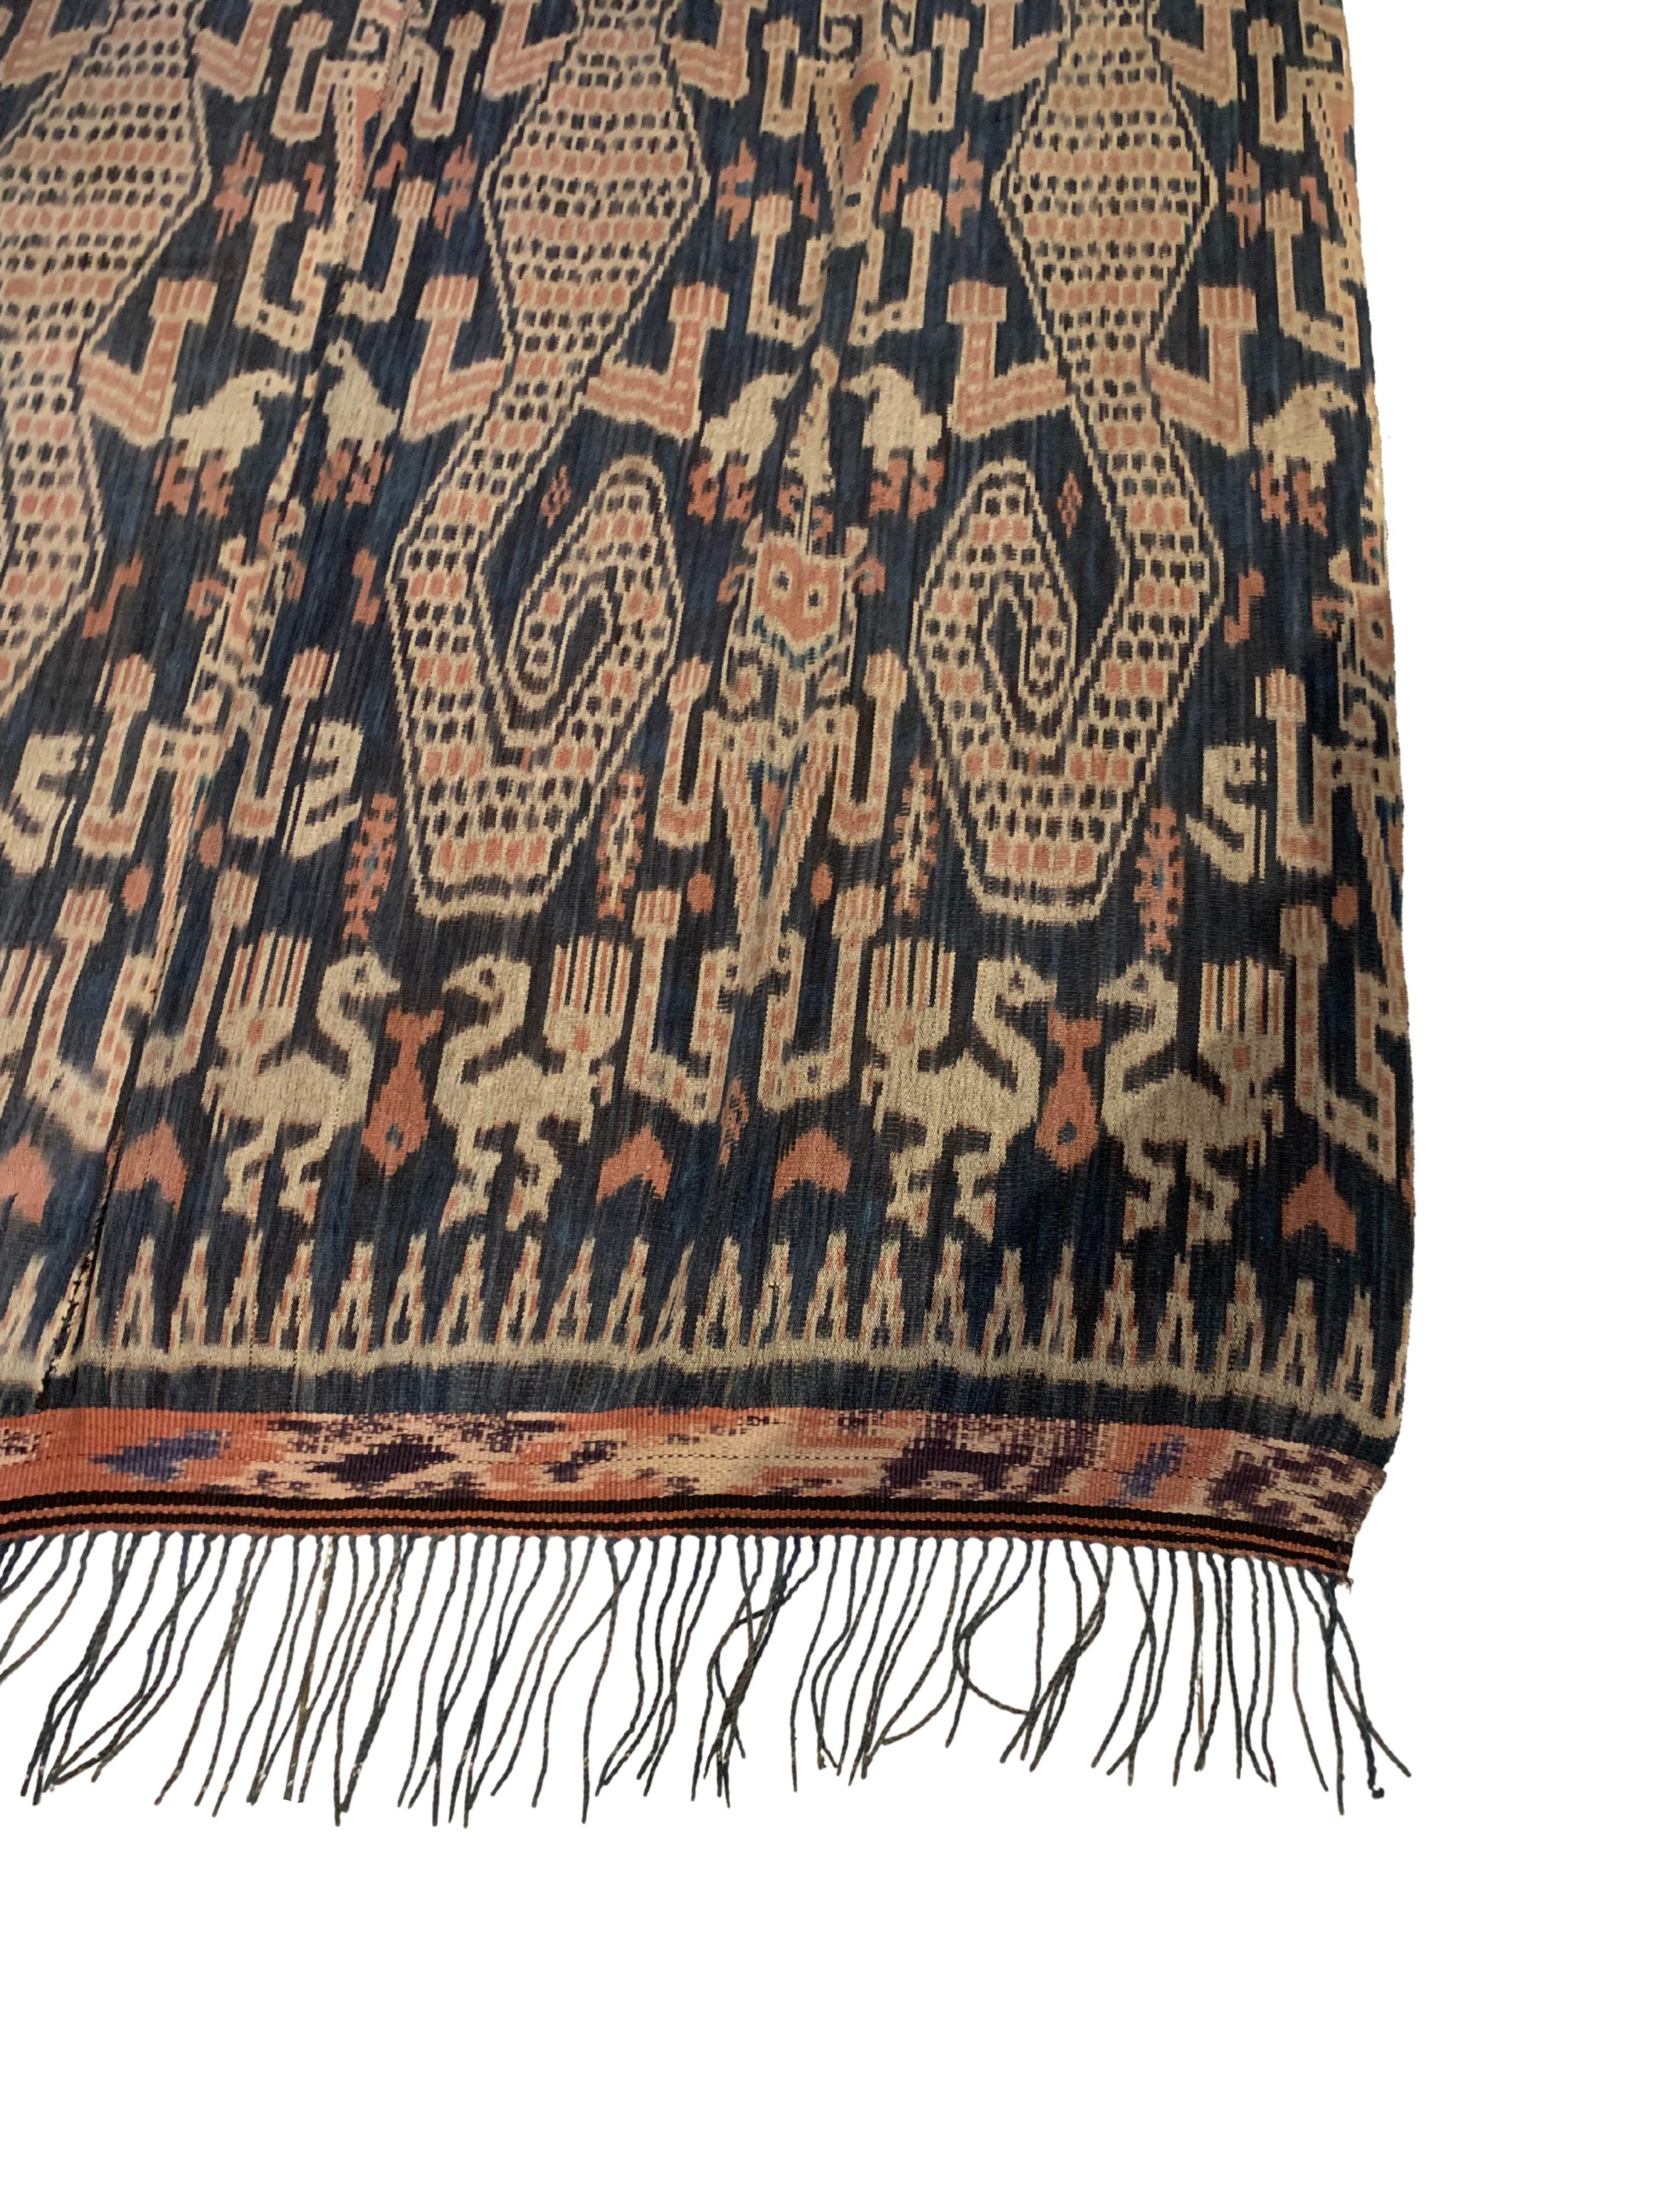 Other Ikat Textile from Sumba Island Tribal Motifs, Indonesia For Sale